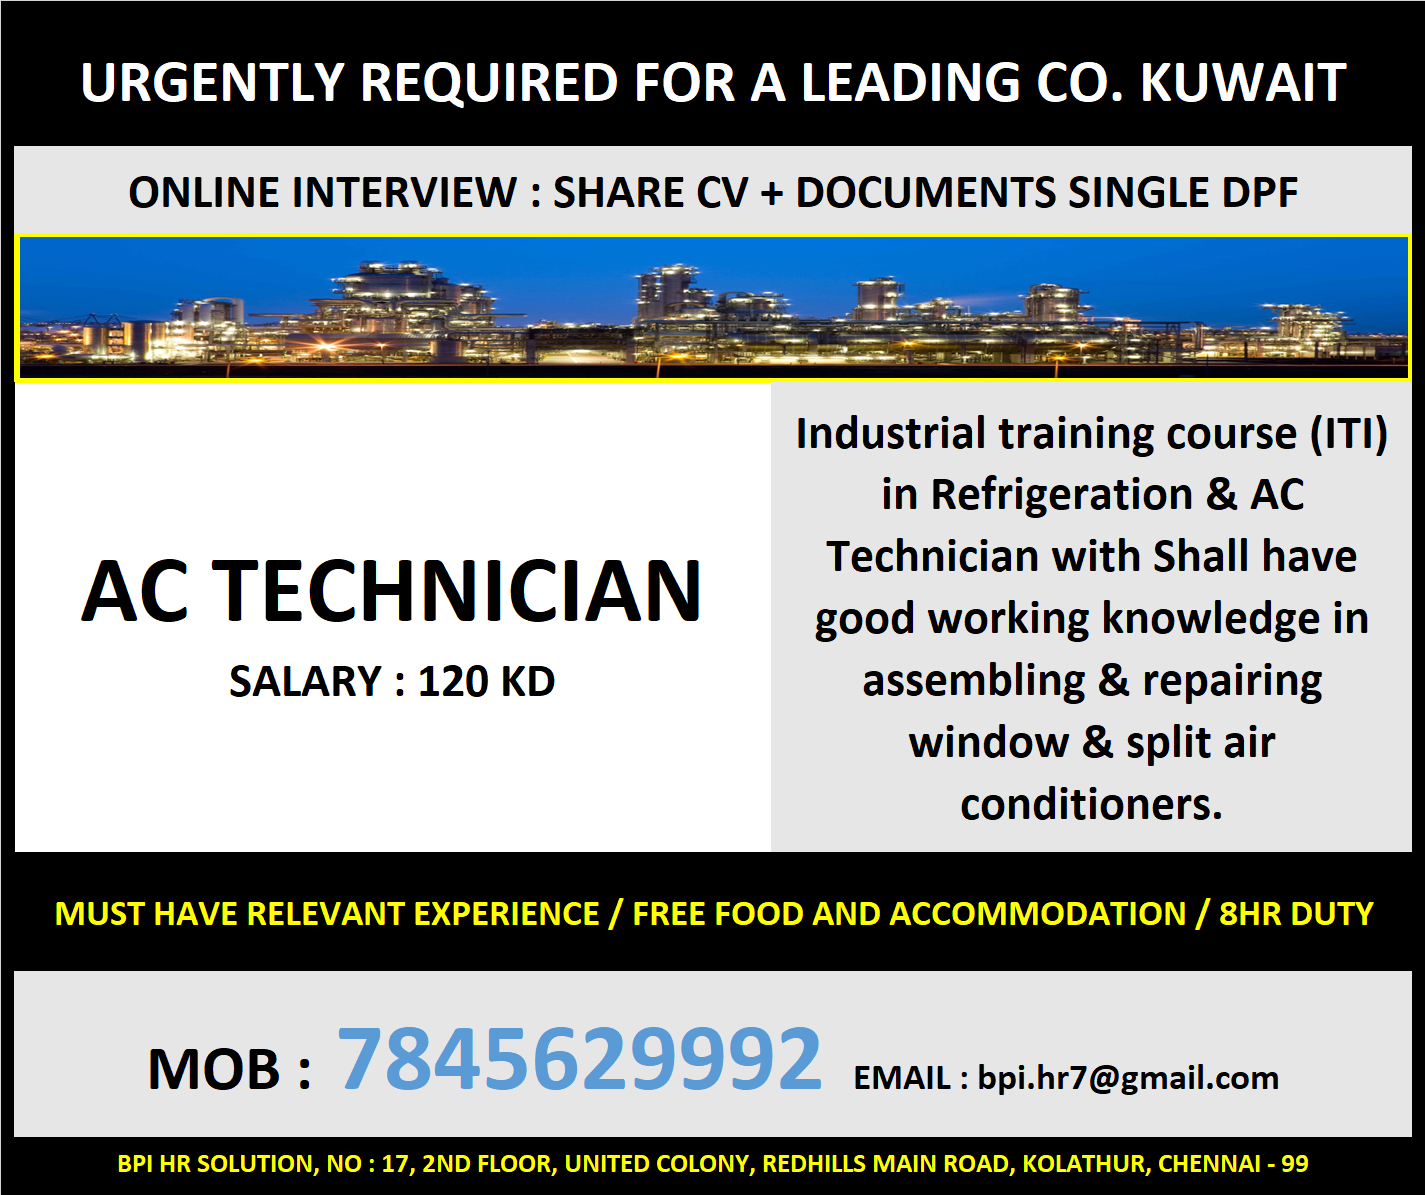 urgently required for a leading co. in kuwait